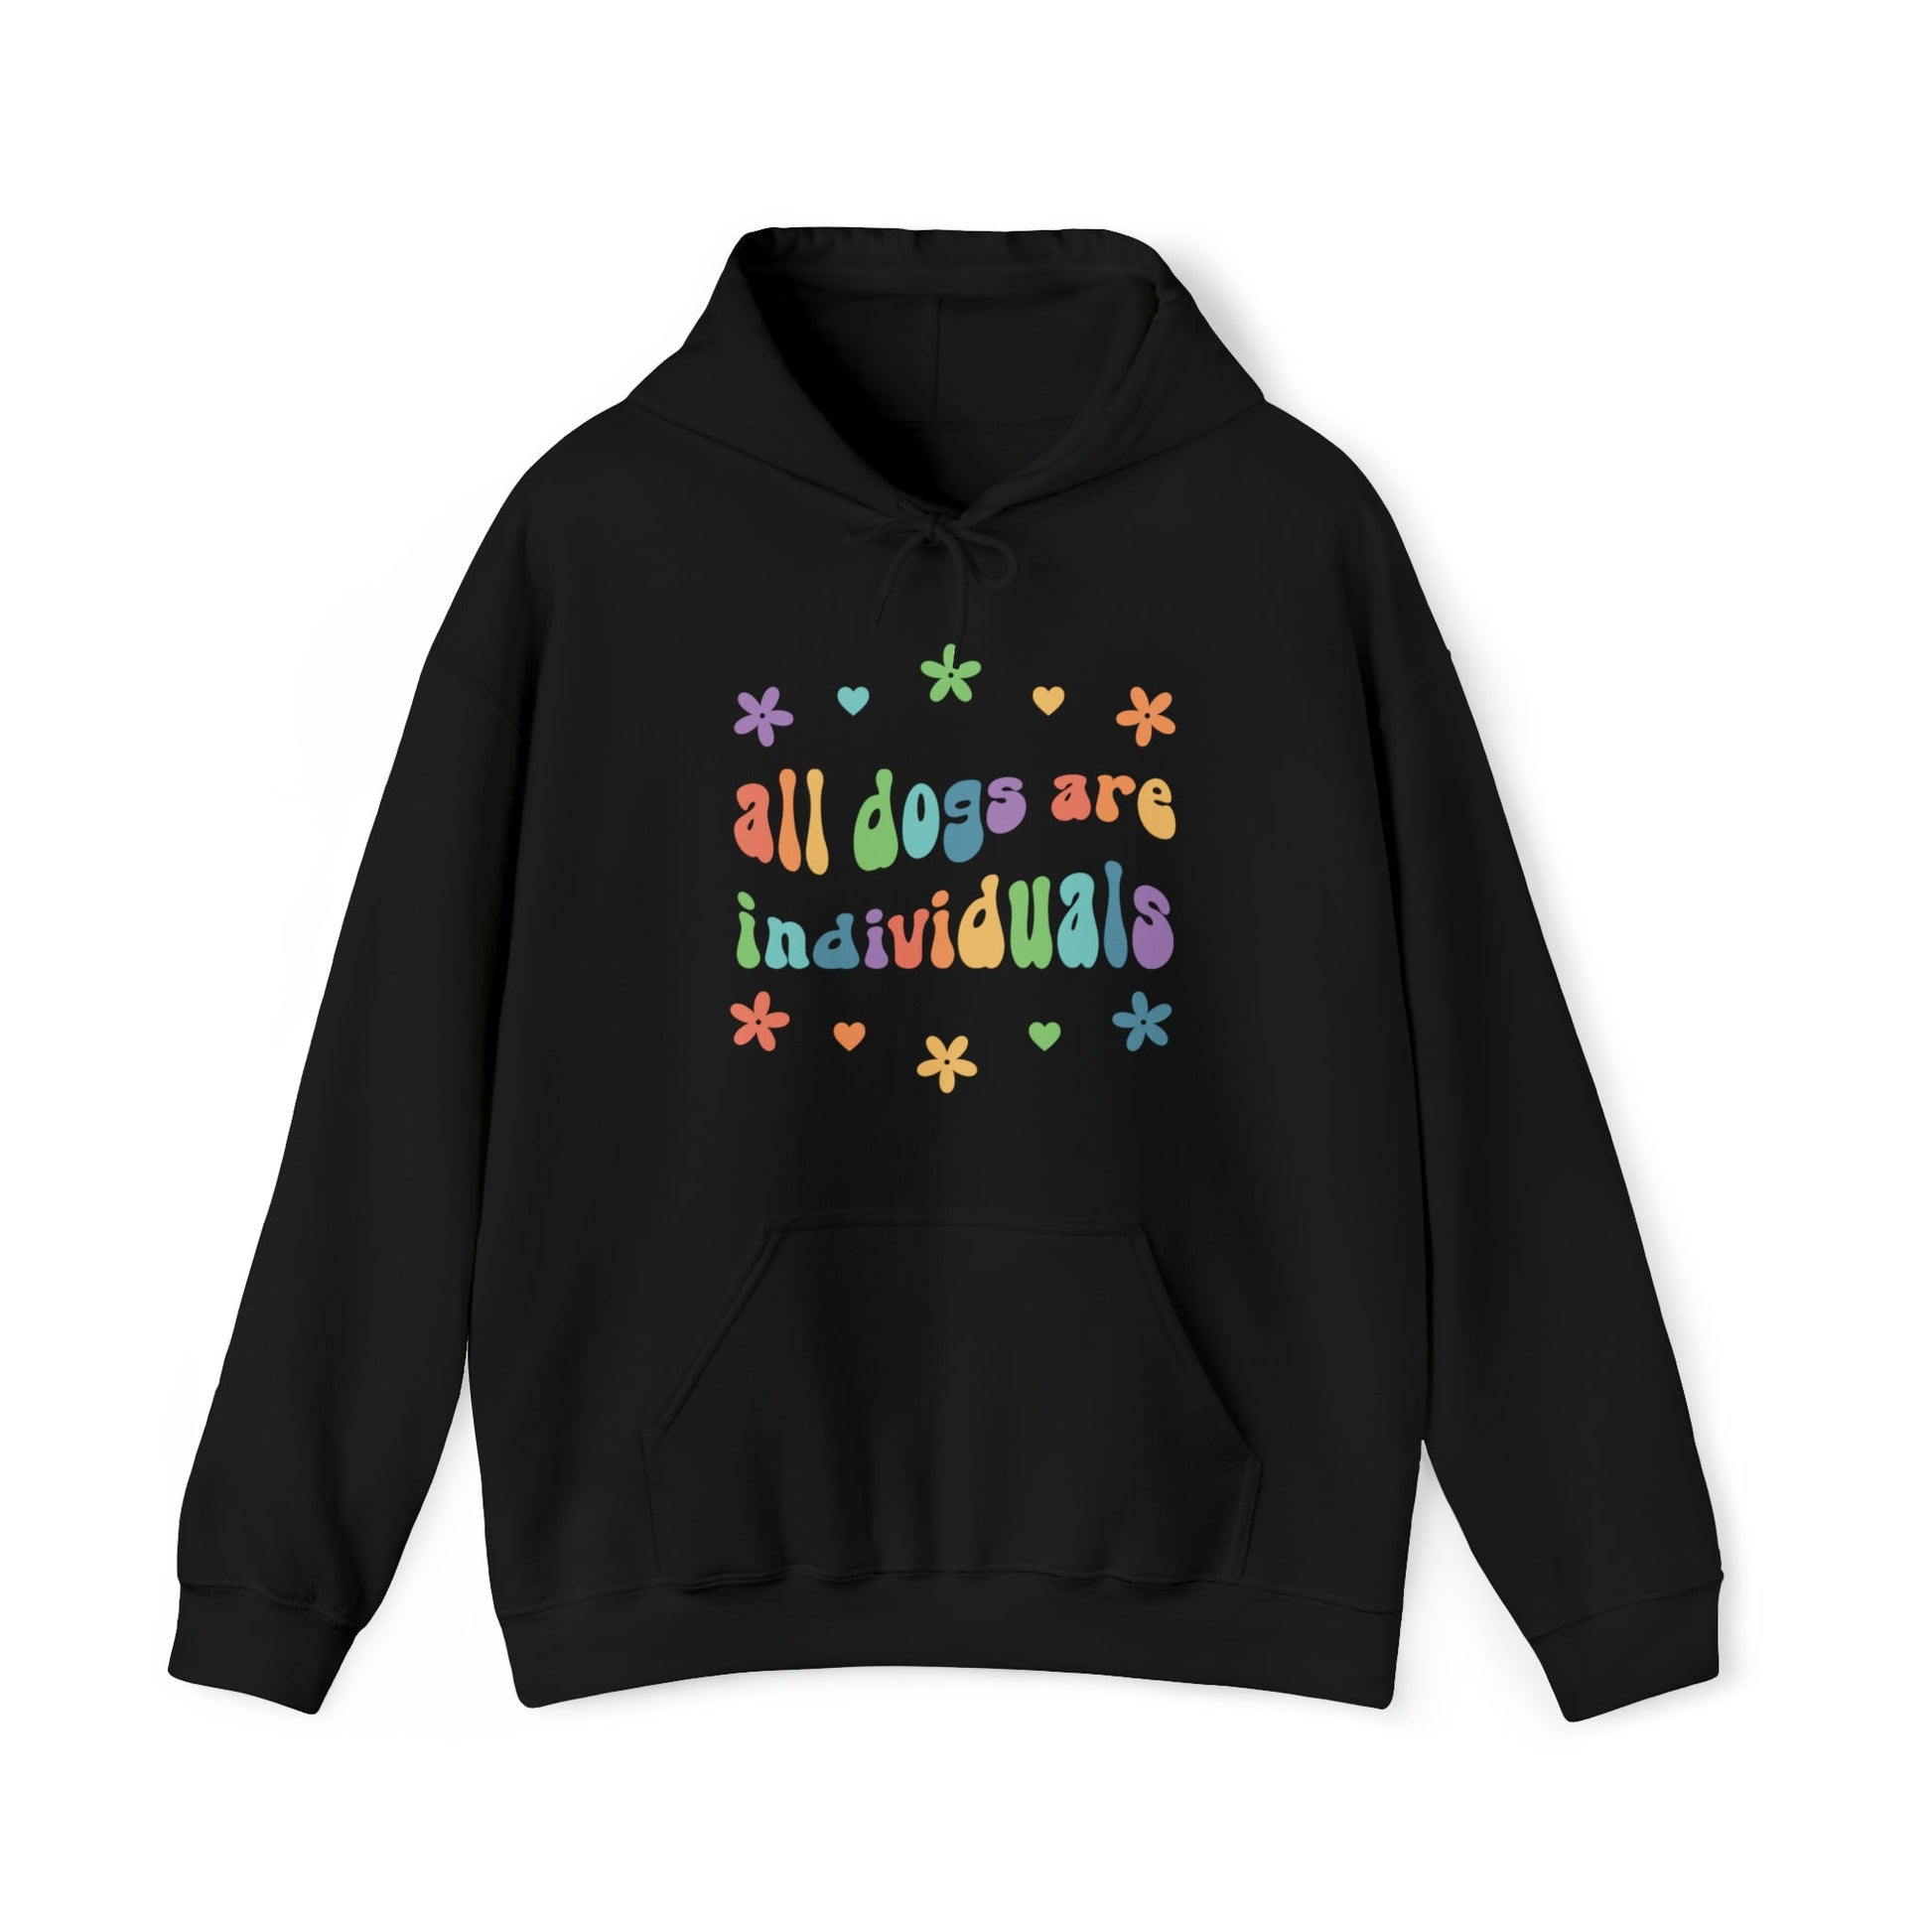 All Dogs are Individuals | Hooded Sweatshirt - Detezi Designs-62801437552179139628